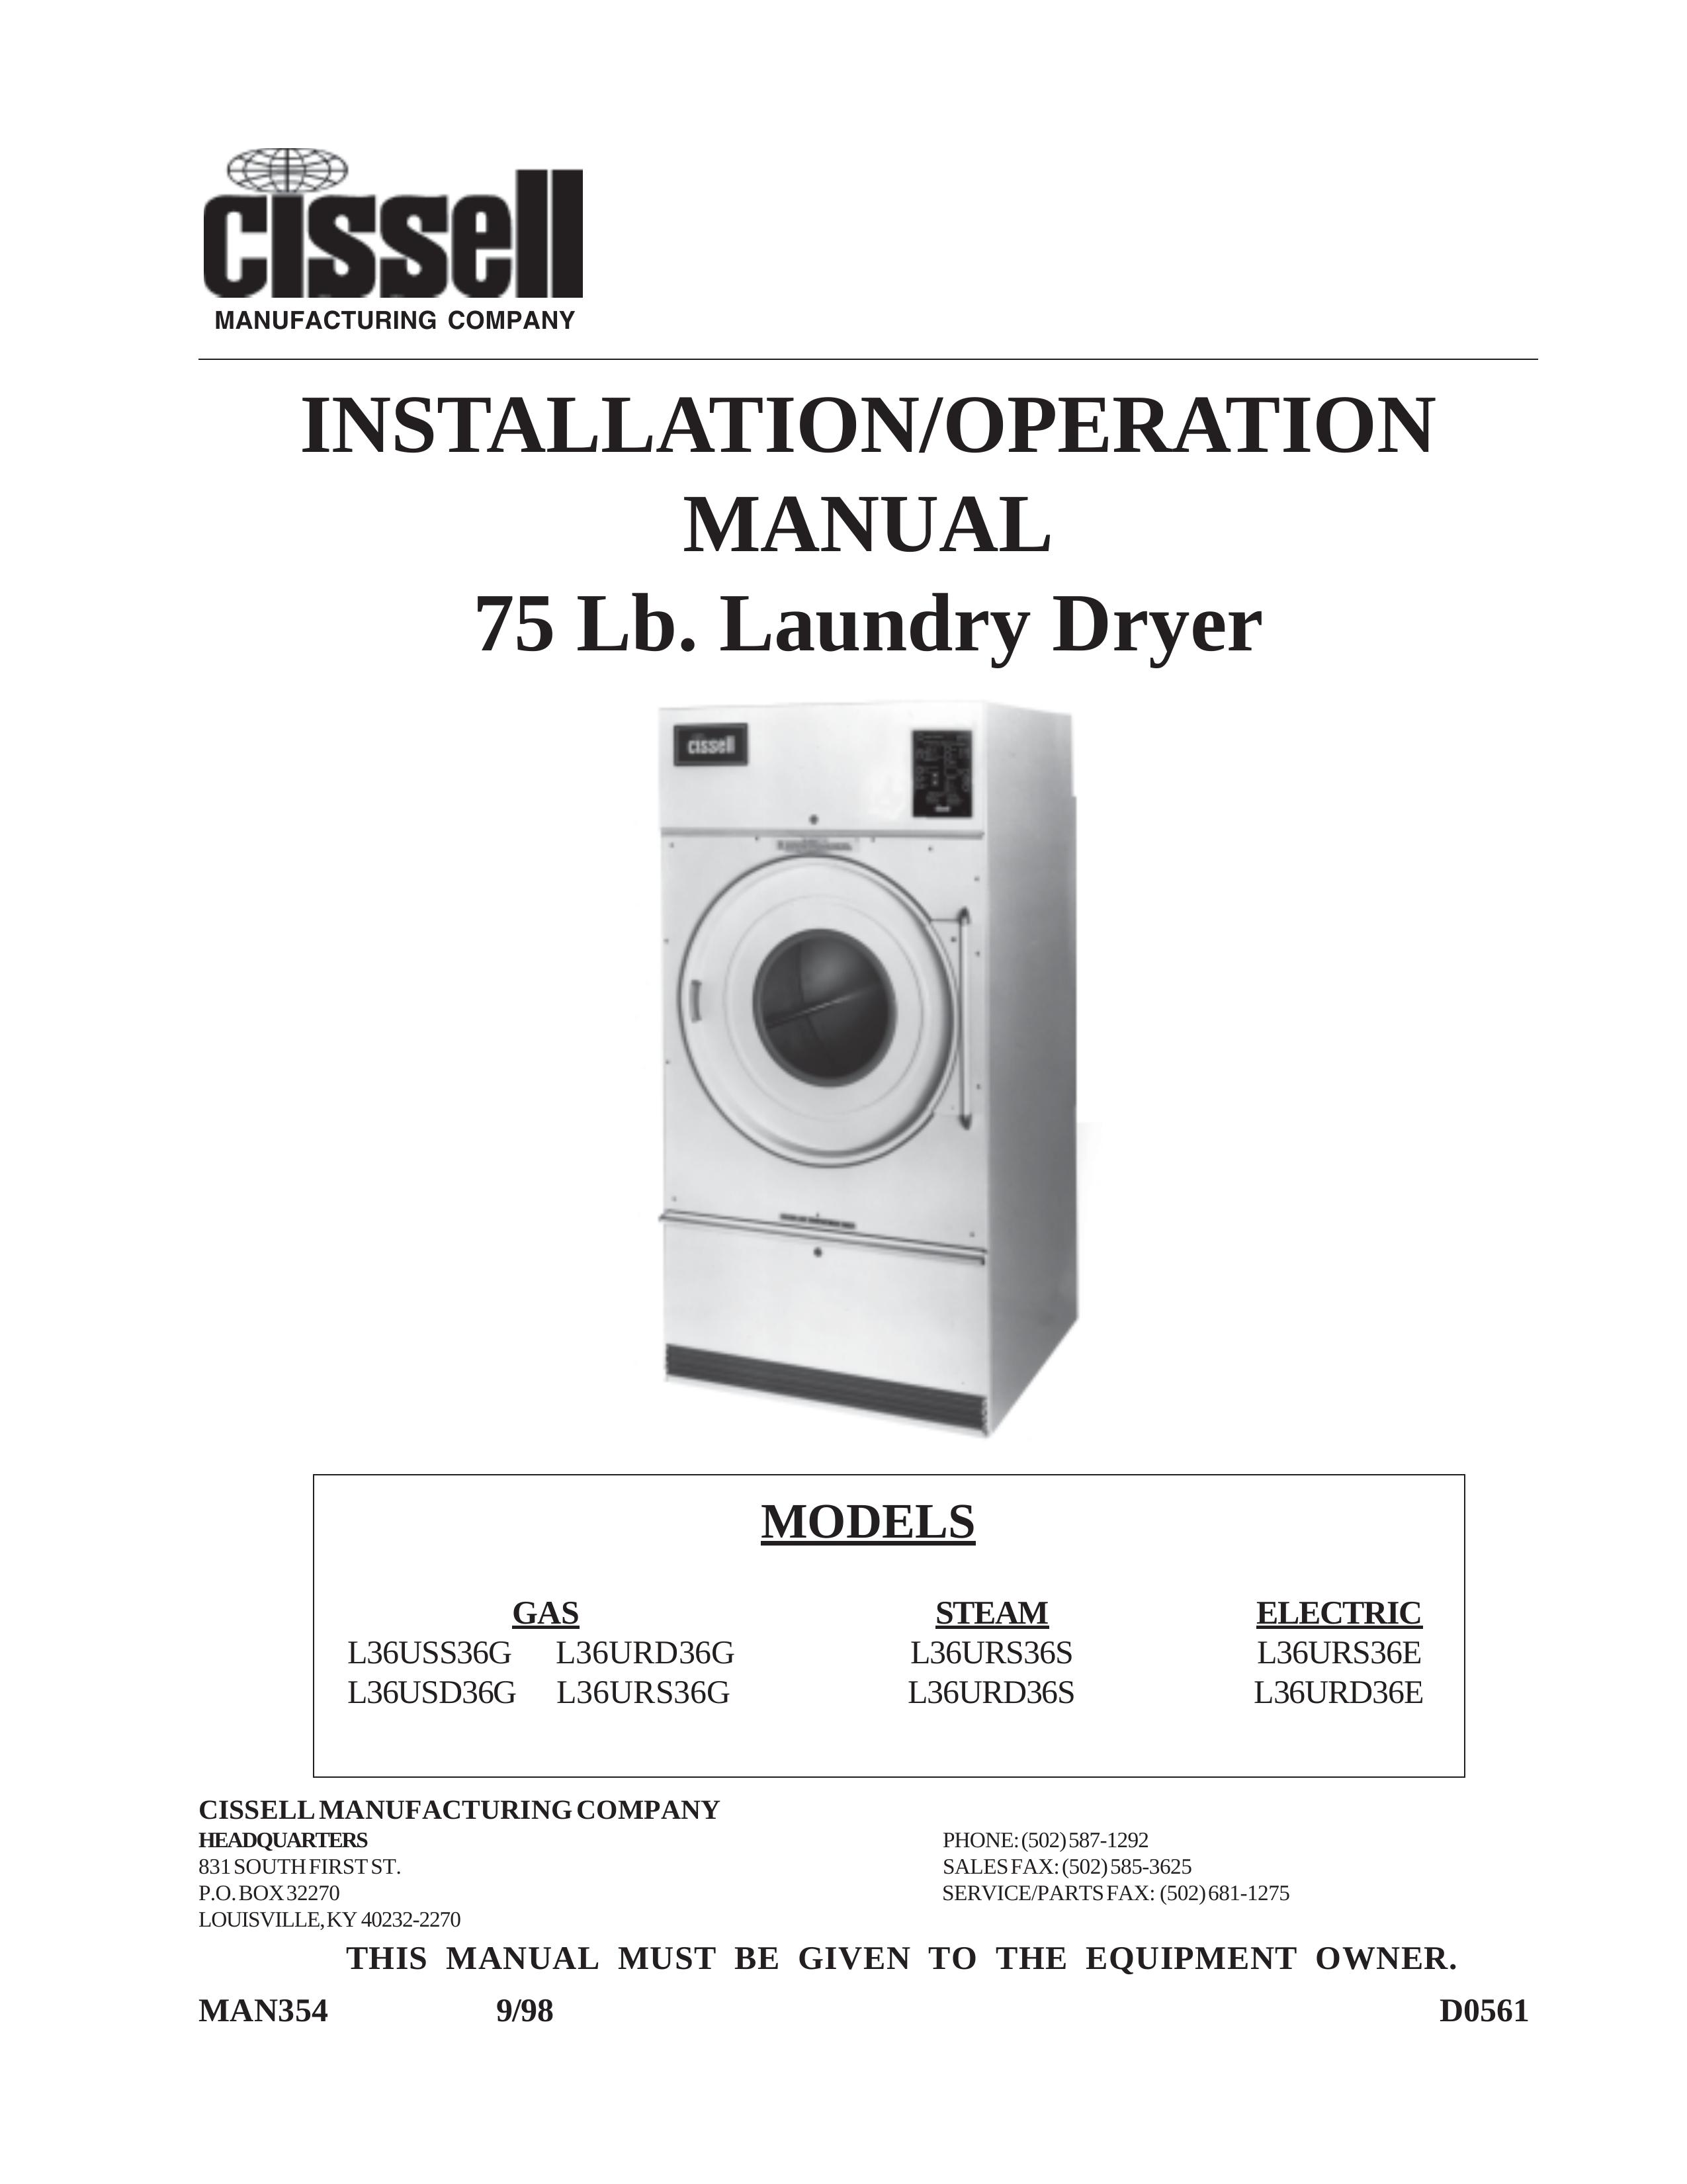 Cissell L36URD36S Clothes Dryer User Manual